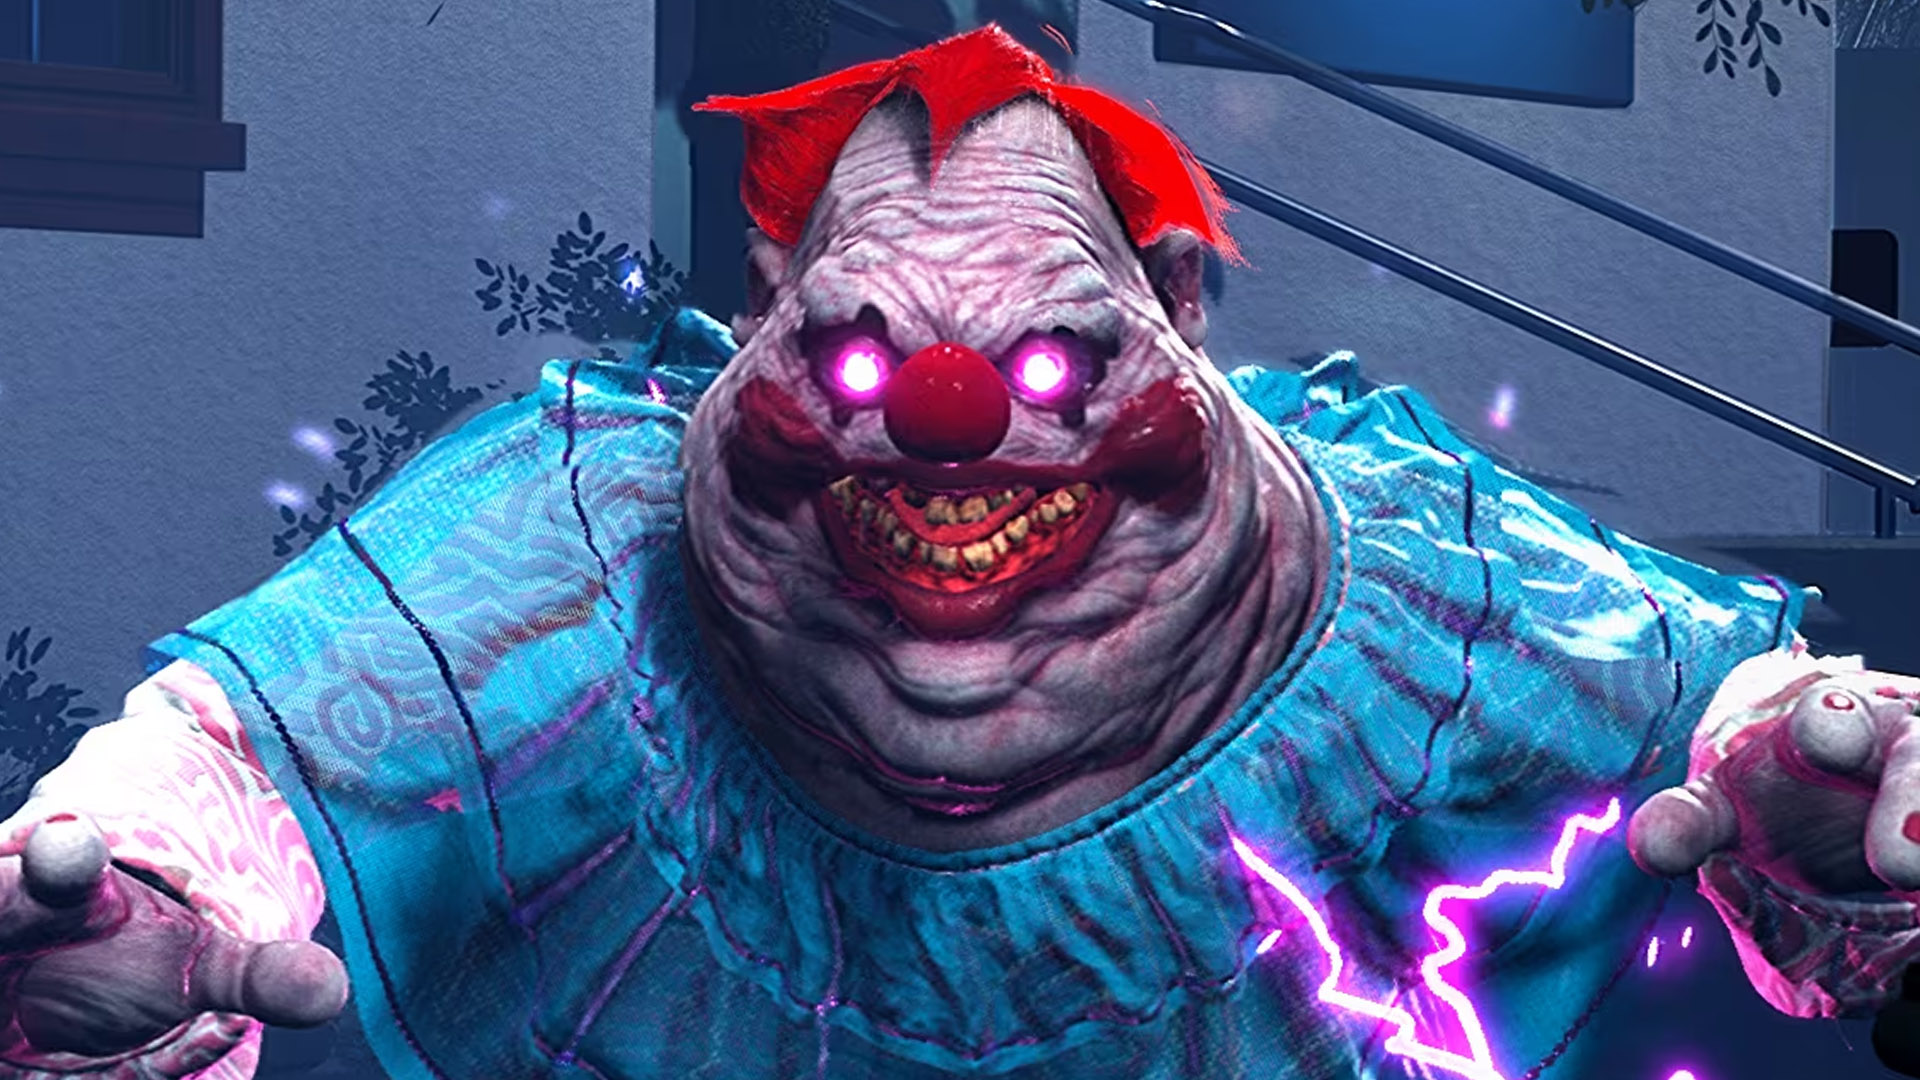 Killer Klowns from Outer Space's launch hits popcorn gun problems